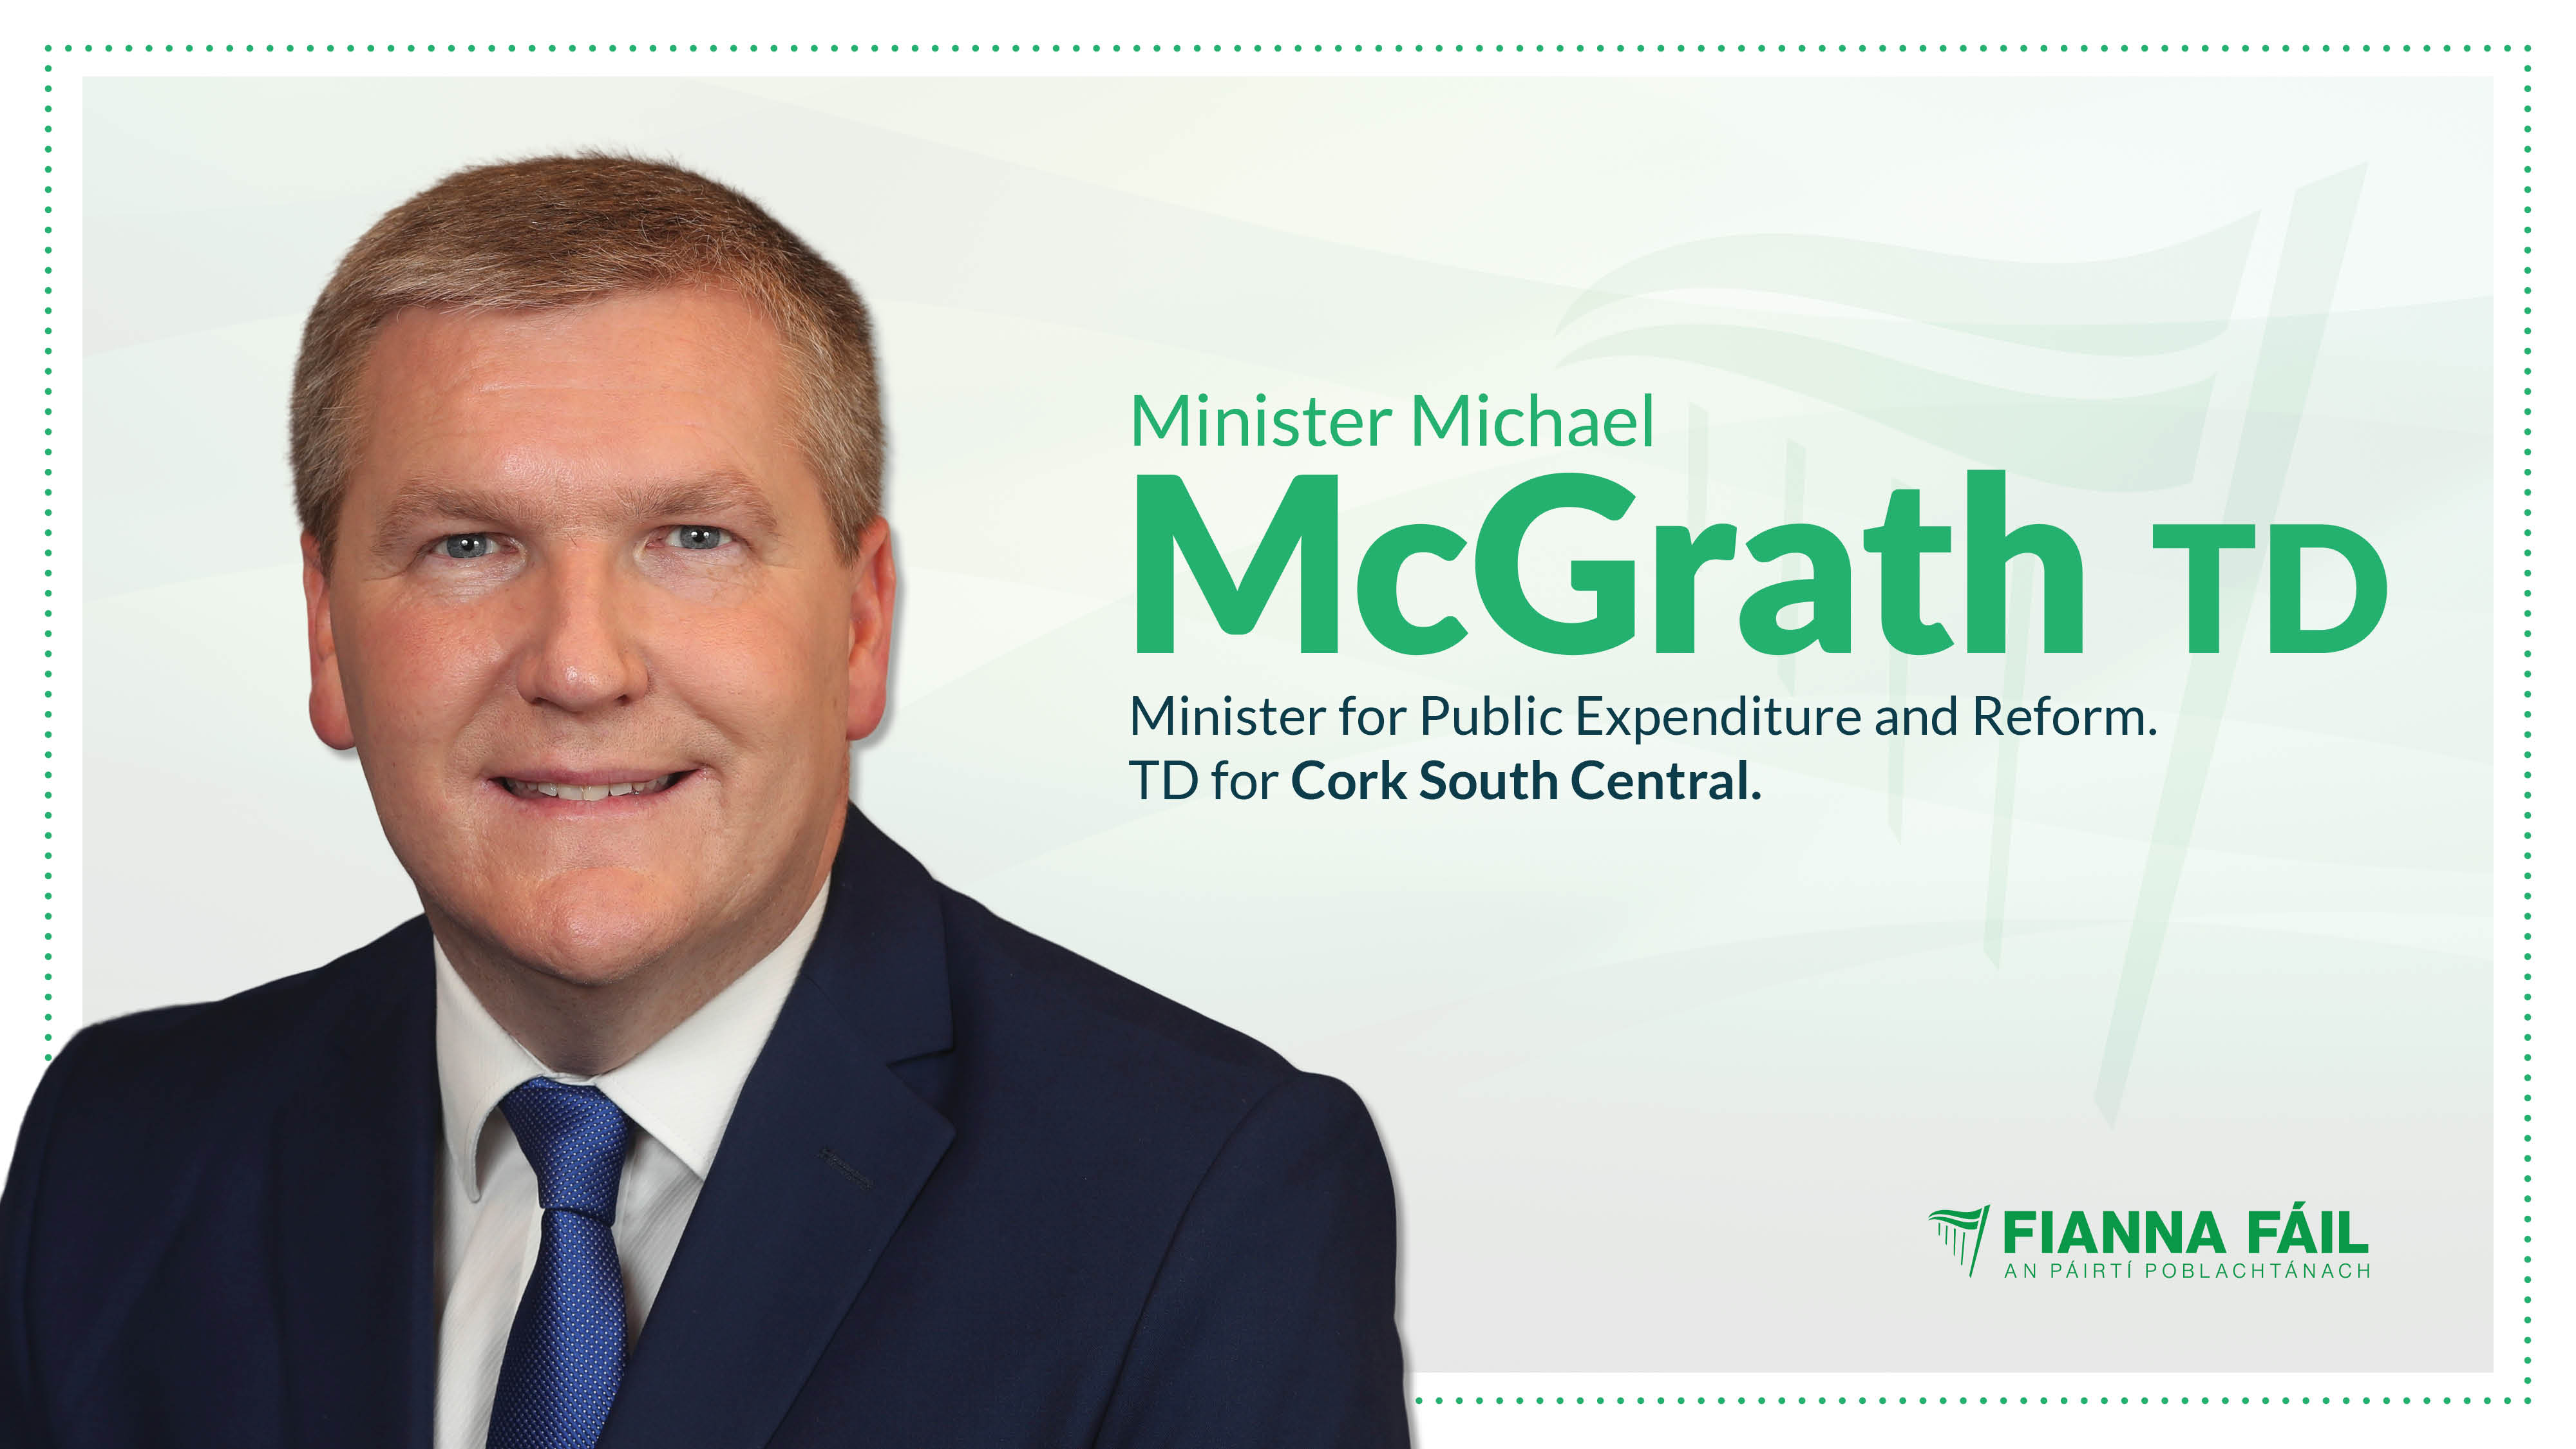 Minister McGrath launches Public Service Innovation Fund 2021 Call